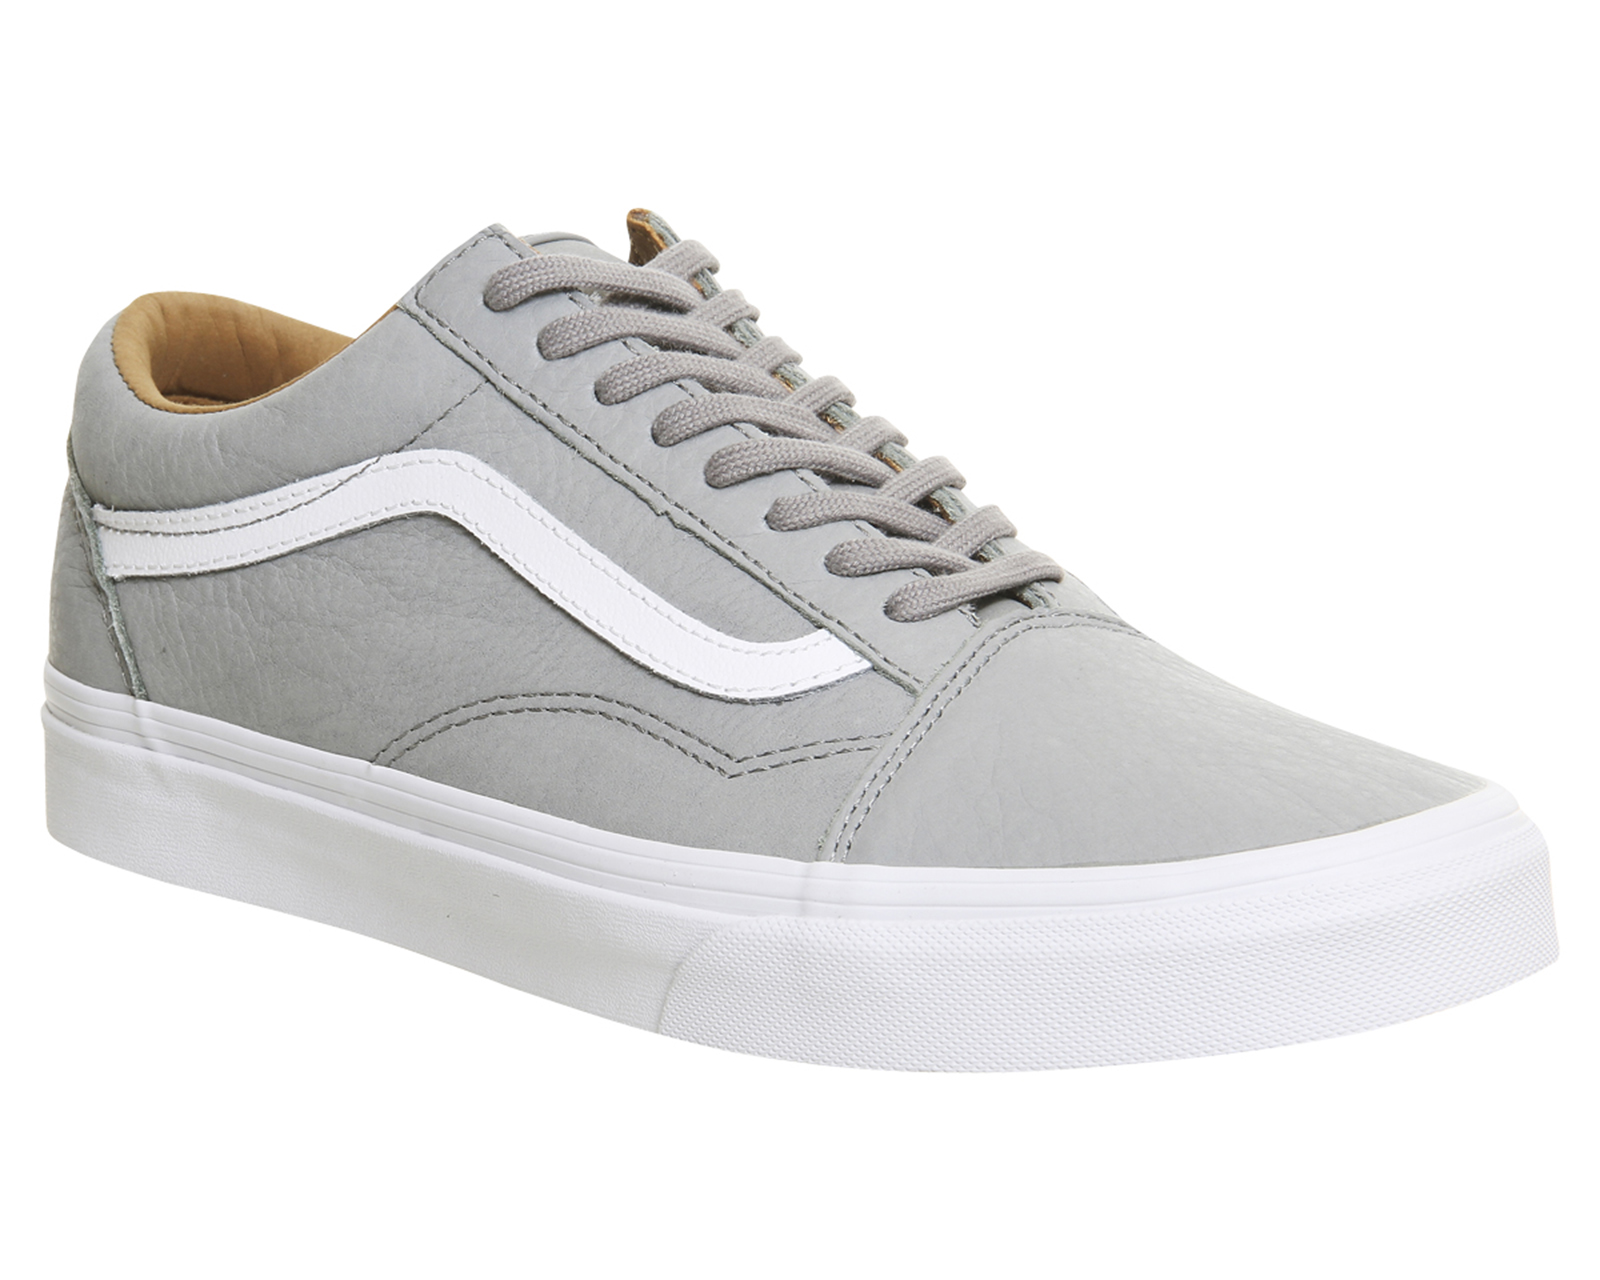 grey and leather vans - 61% OFF 